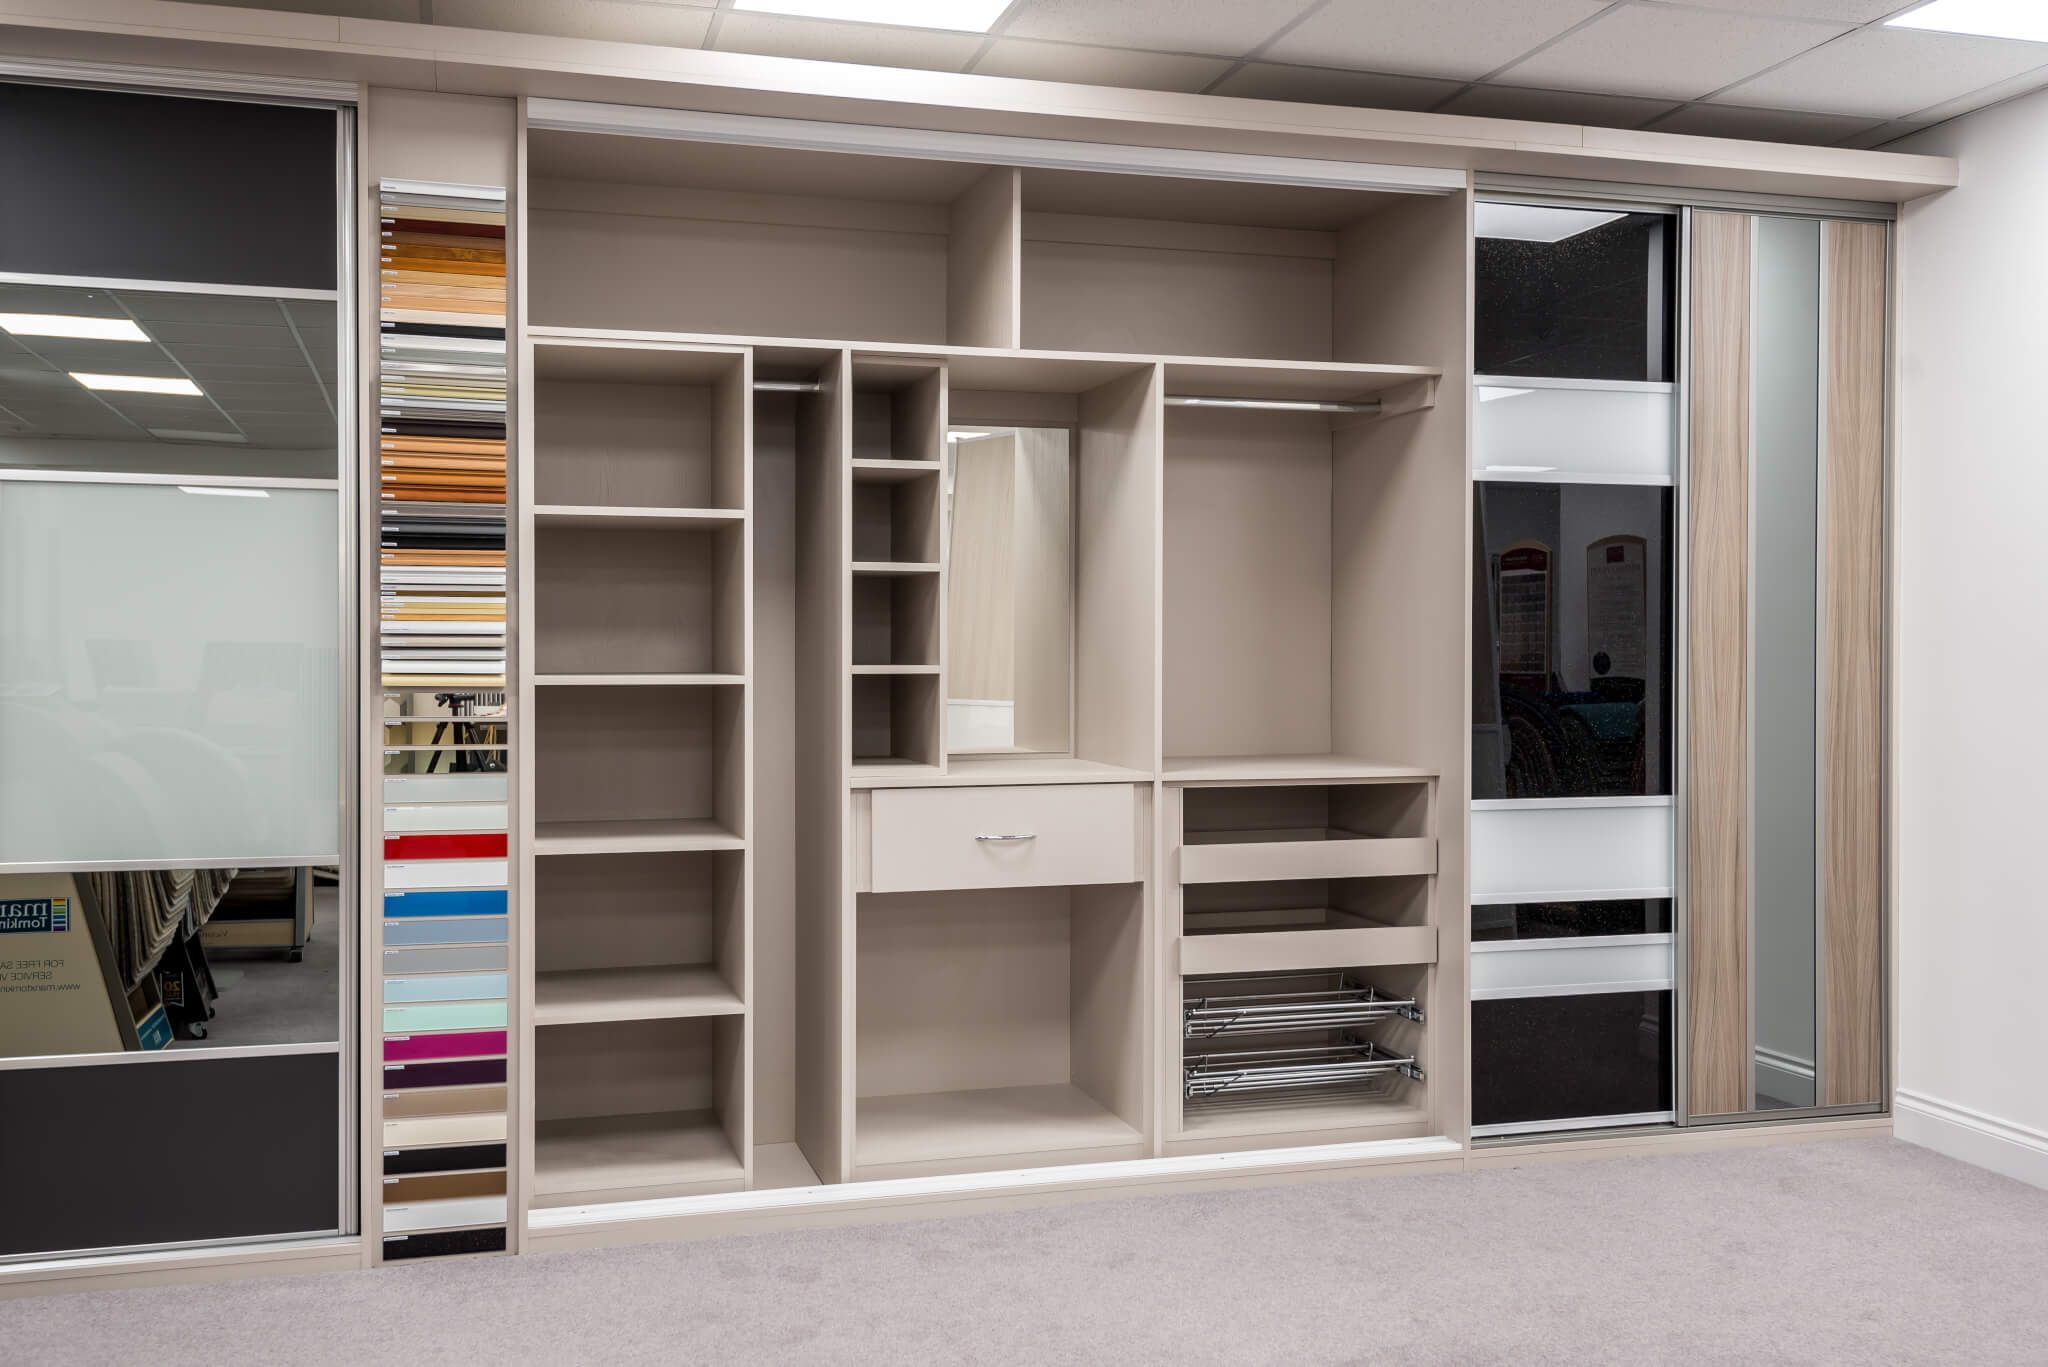 Designing The Perfect Fitted Wardrobe: Shelves Vs Drawers Vs Hanging Space  (which Is Best)? | Millers With Regard To Double Wardrobes With Drawers And Shelves (View 11 of 15)